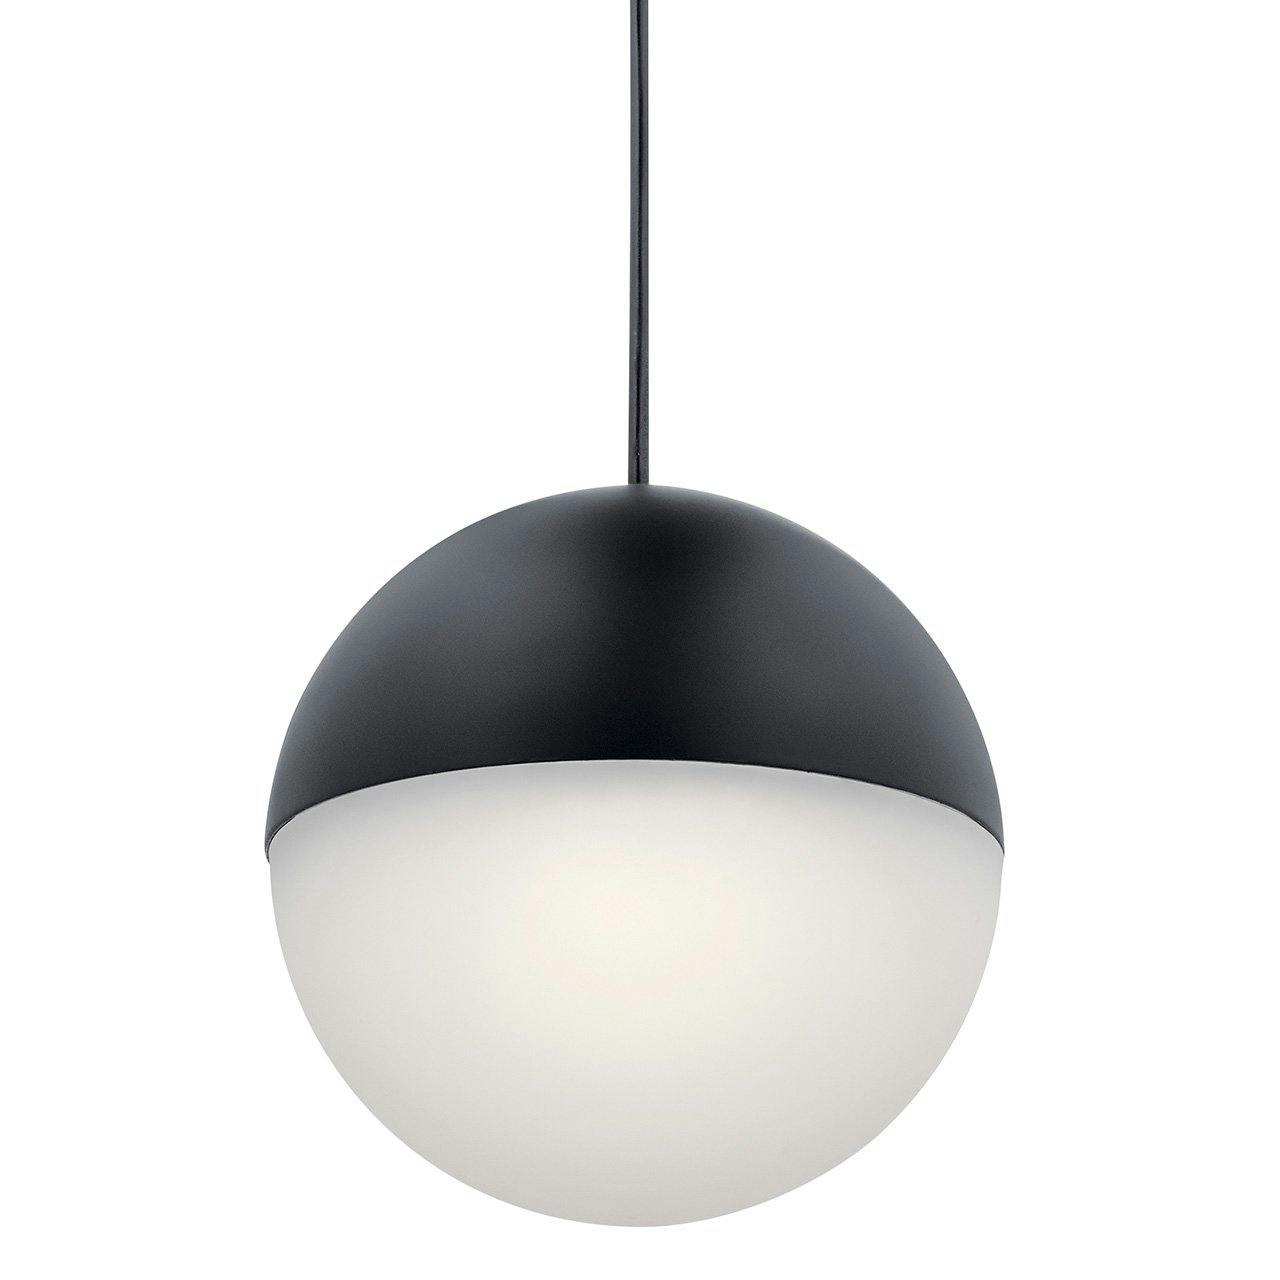 Moonlit 8" LED Pendant Matte Black without the canopy on a white background